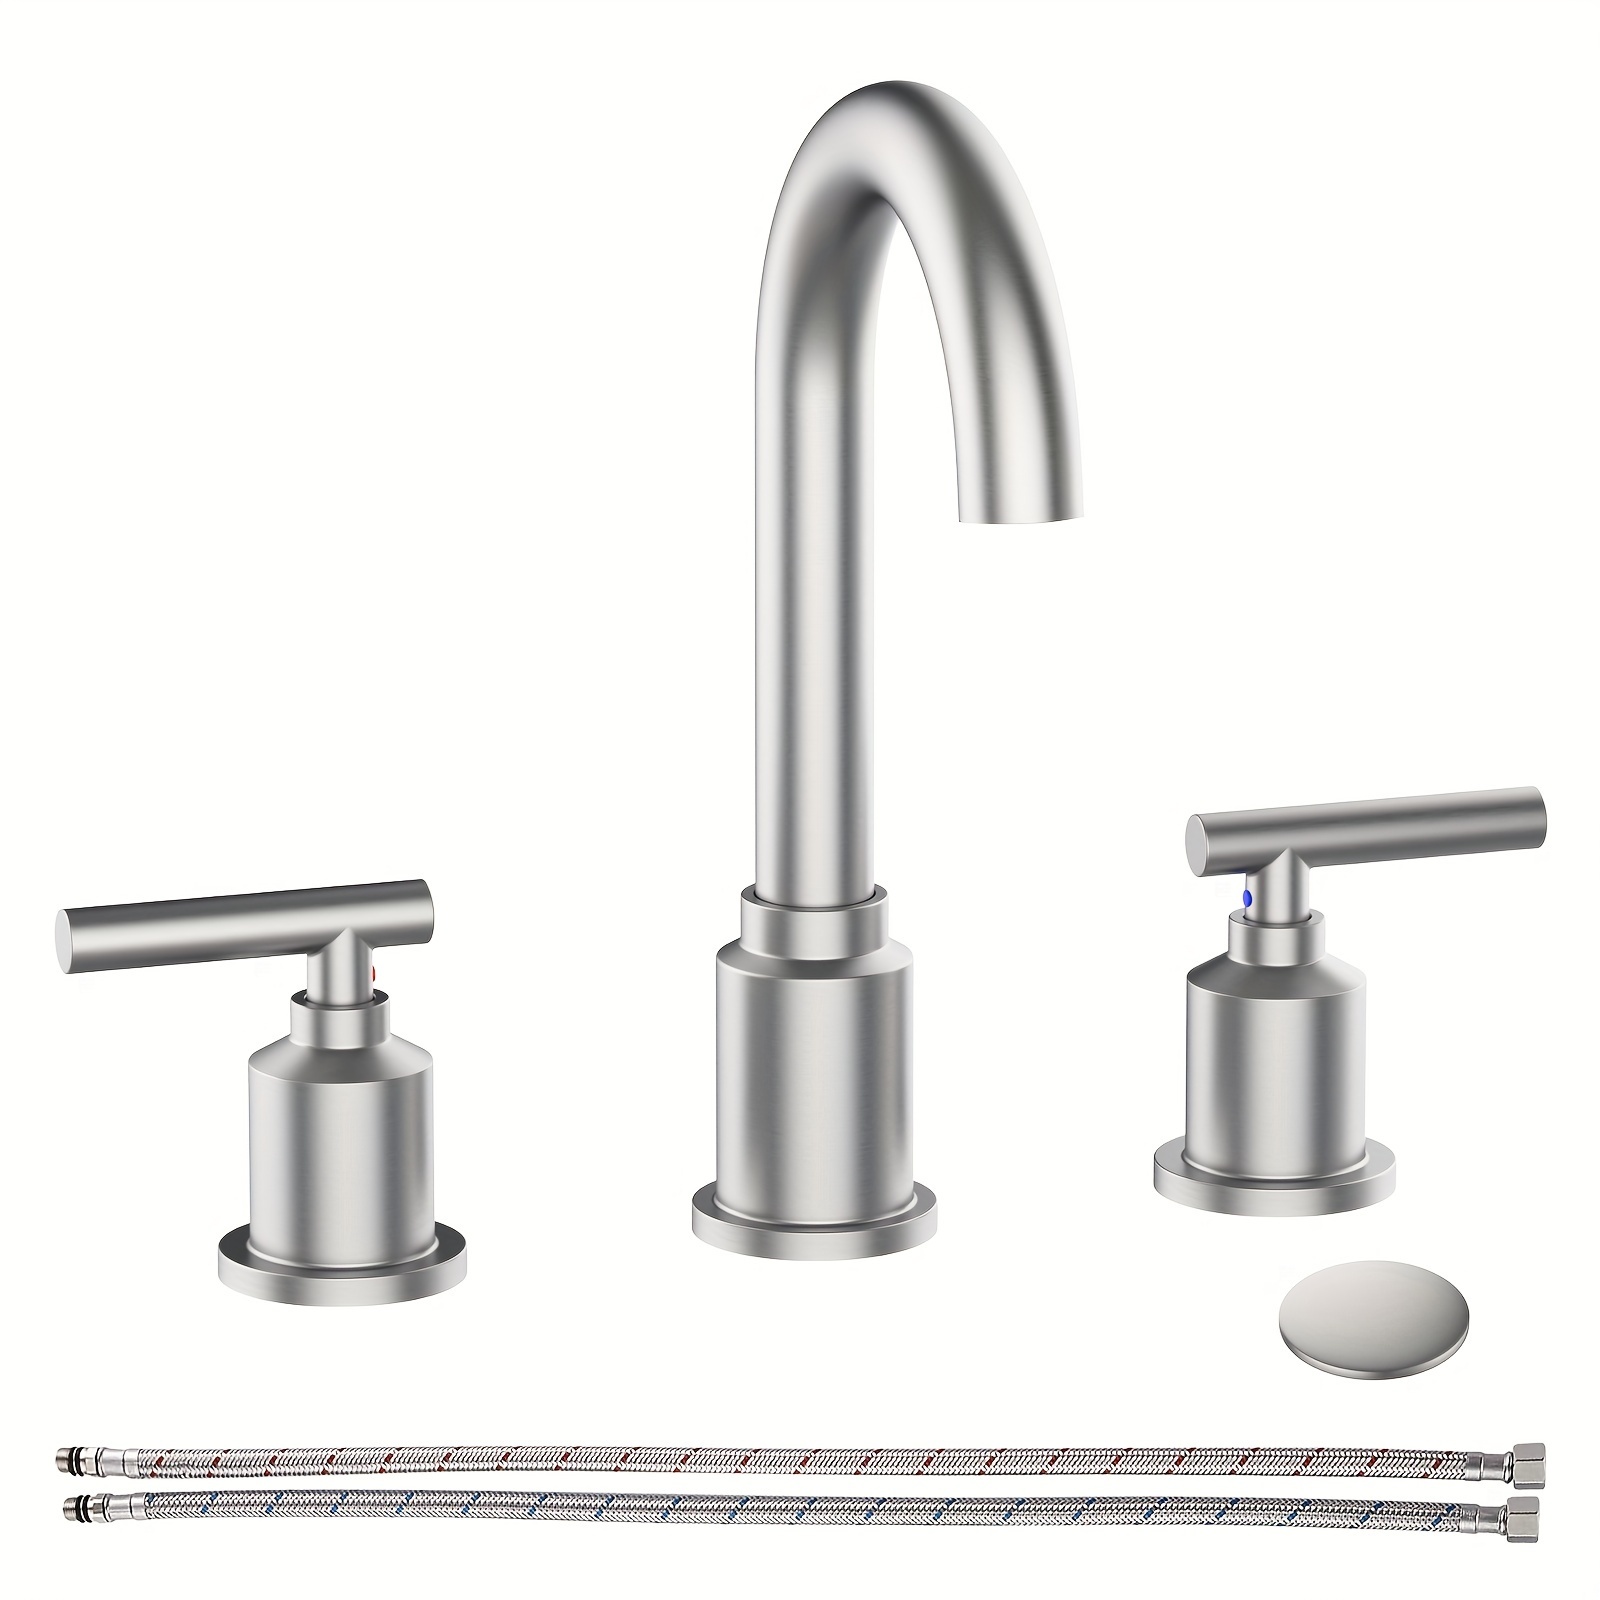 

Bathroom Faucet, Brushed Nickel Widespread Bathroom Sink Faucet, 8 Inch Bathroom Faucet For Sink 3 Hole With Stainless Steel Pop-up Drain, Modern And Beautiful For Your Bathroom (brushed Nickel)